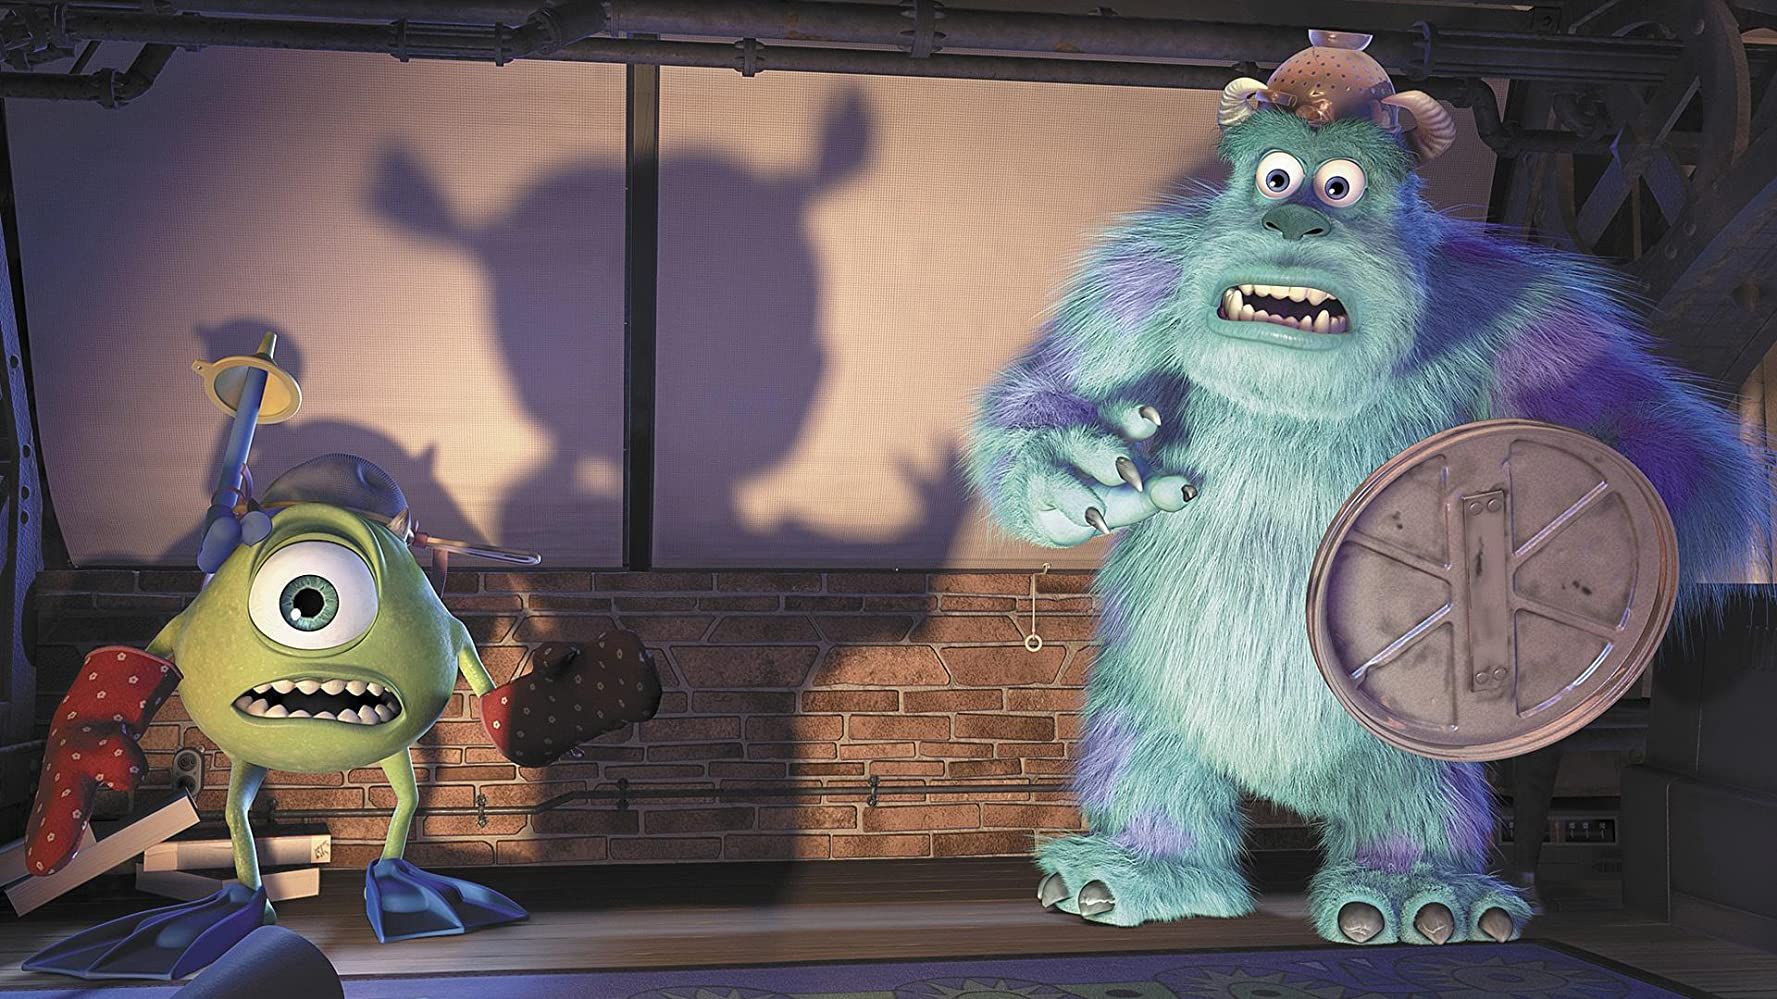 Monsters University: News Characters Revealed